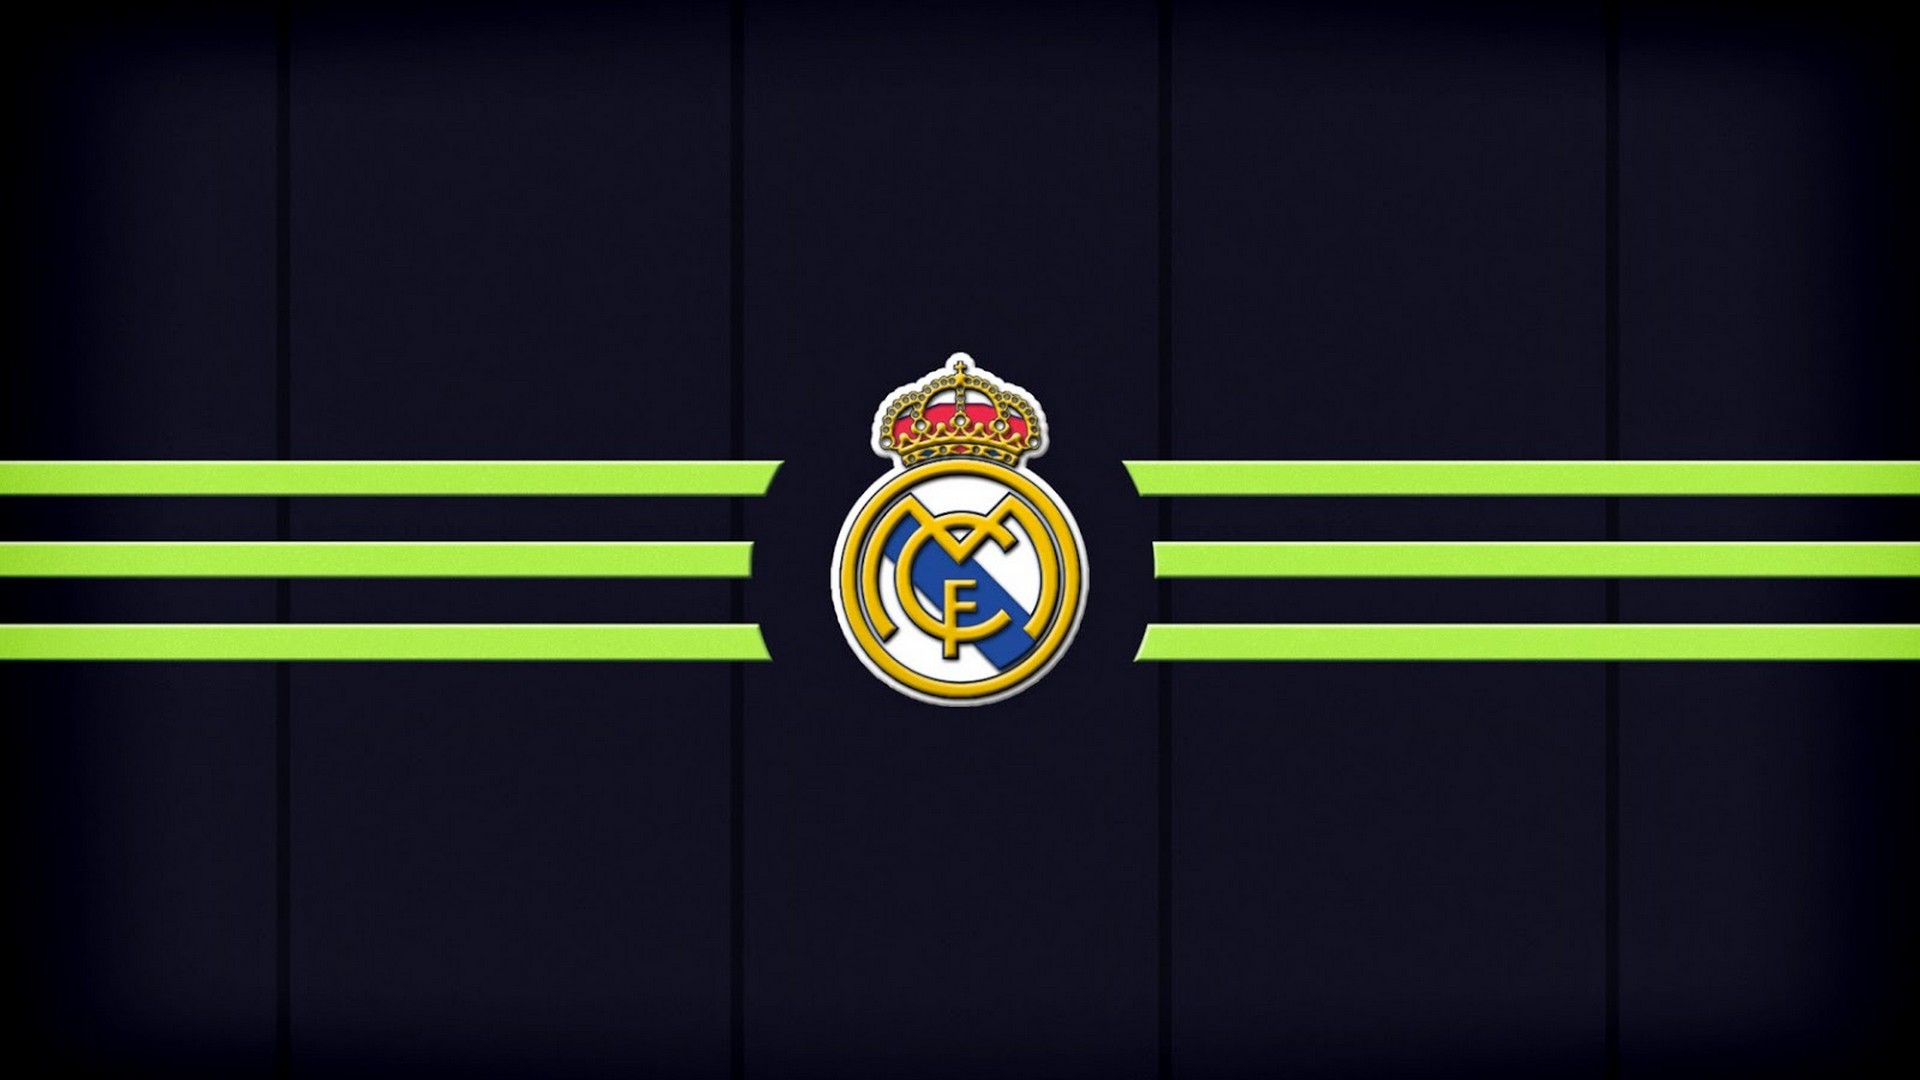 Real Madrid CF For PC Wallpaper With Resolution 1920X1080 pixel. You can make this wallpaper for your Mac or Windows Desktop Background, iPhone, Android or Tablet and another Smartphone device for free